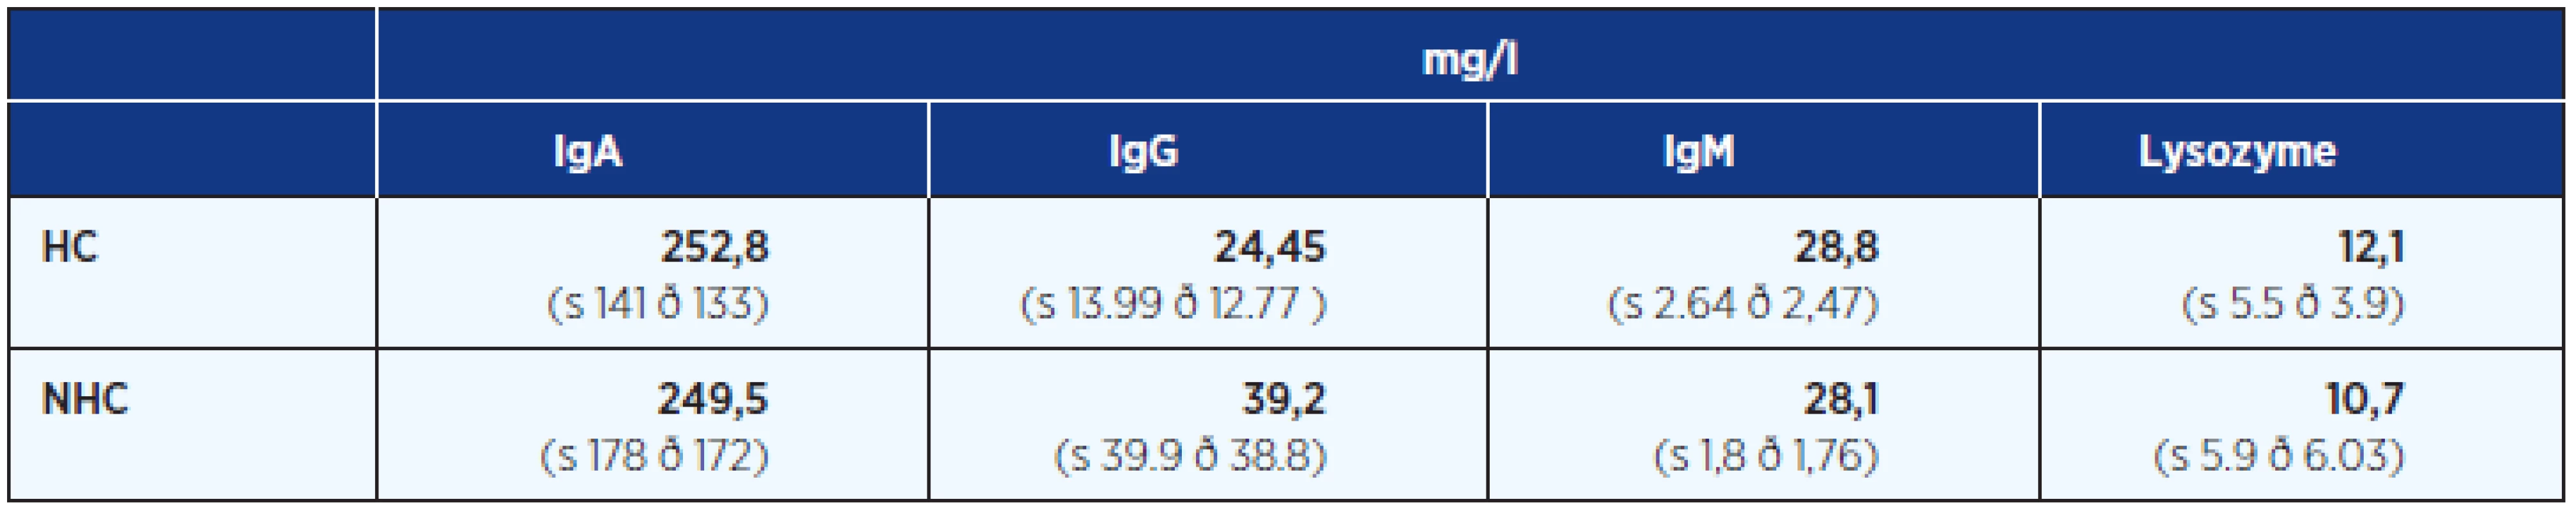 Concentration of IgA (78–983 mg/l), IgG (15–176 mg/l), IgM (18.7–27.4 mg/l) and lysozyme (2.6–15.2 mg/l) with standard deviation in native saliva samples